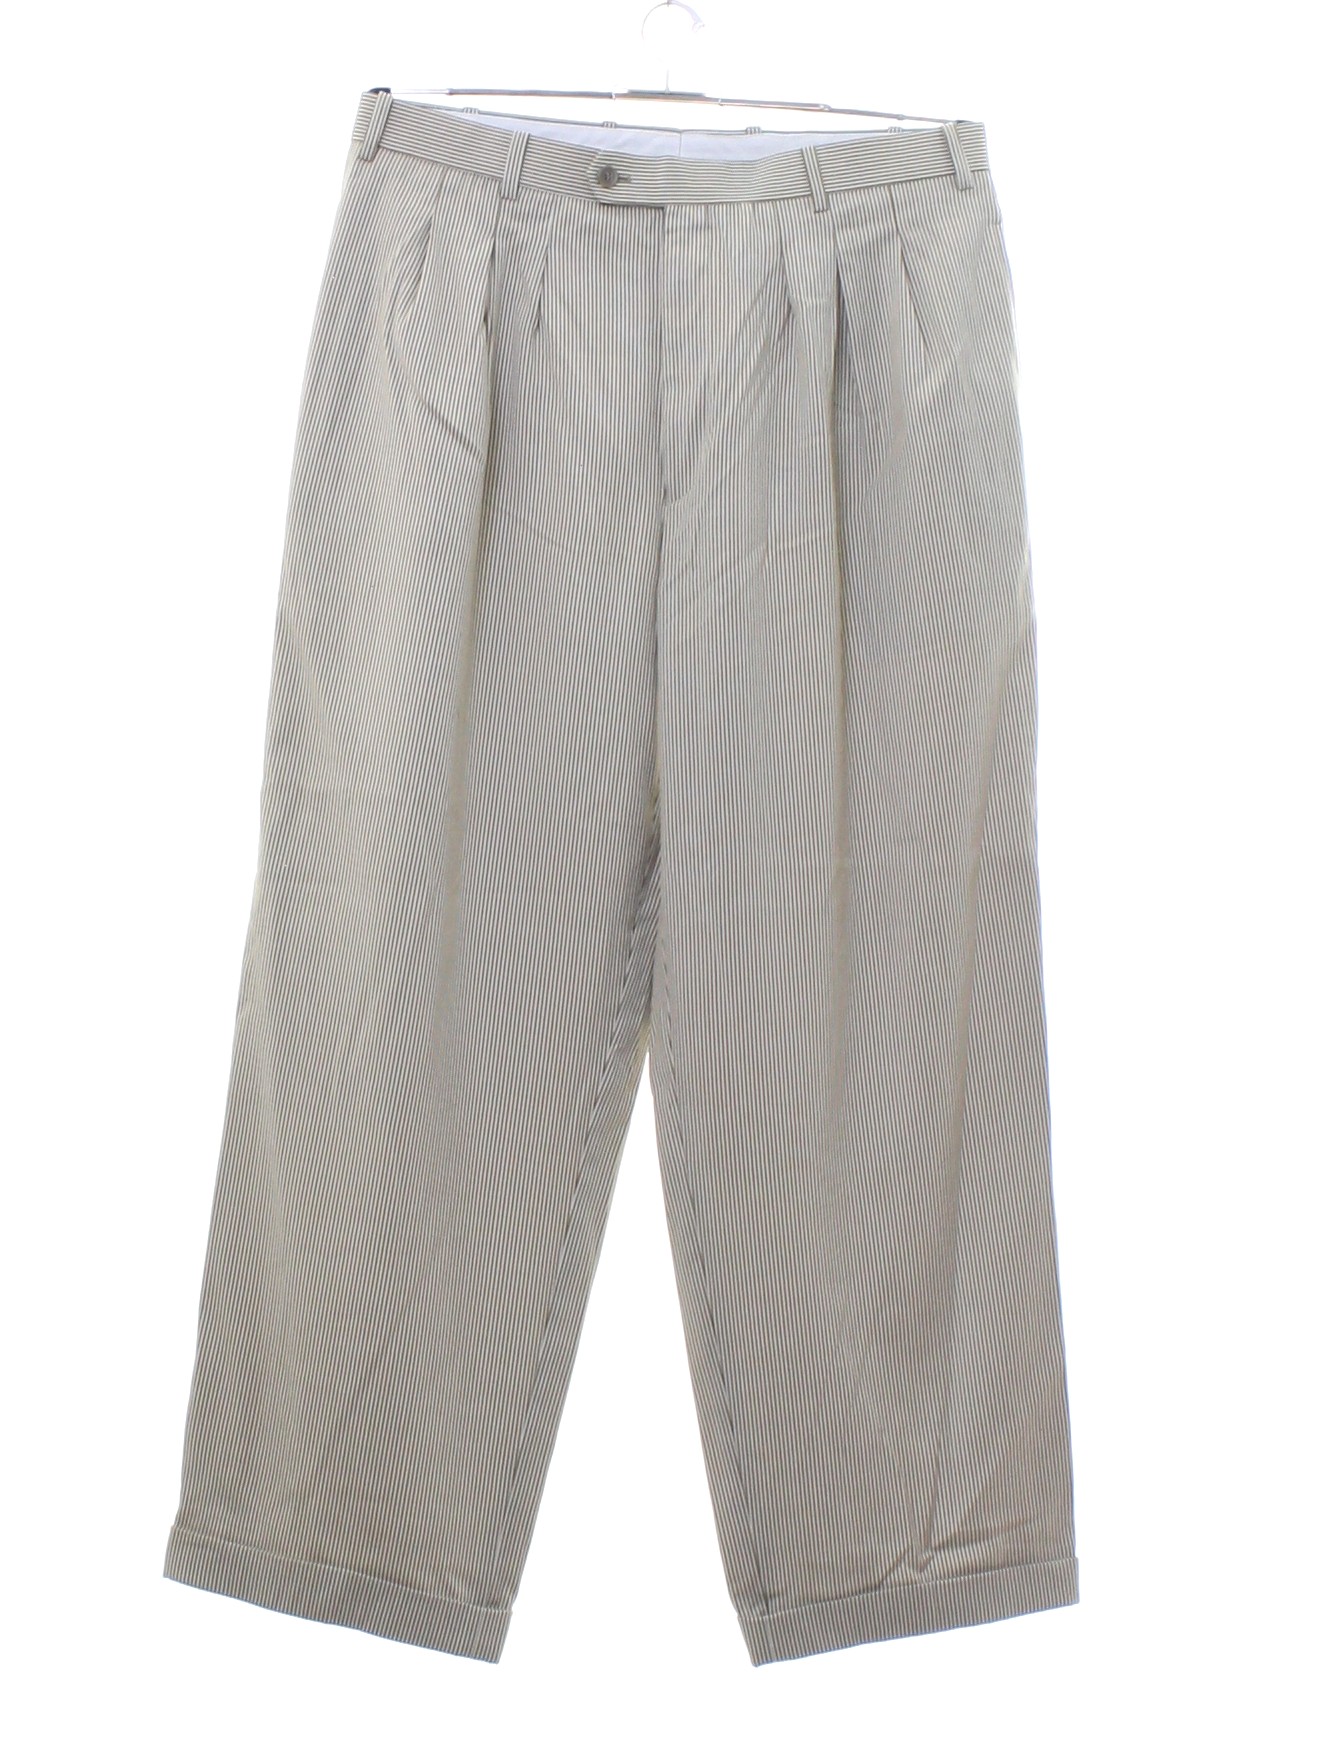 Retro 1990's Pants (Roma) : 90s -Roma- Mens tan and beige pinstriped ...